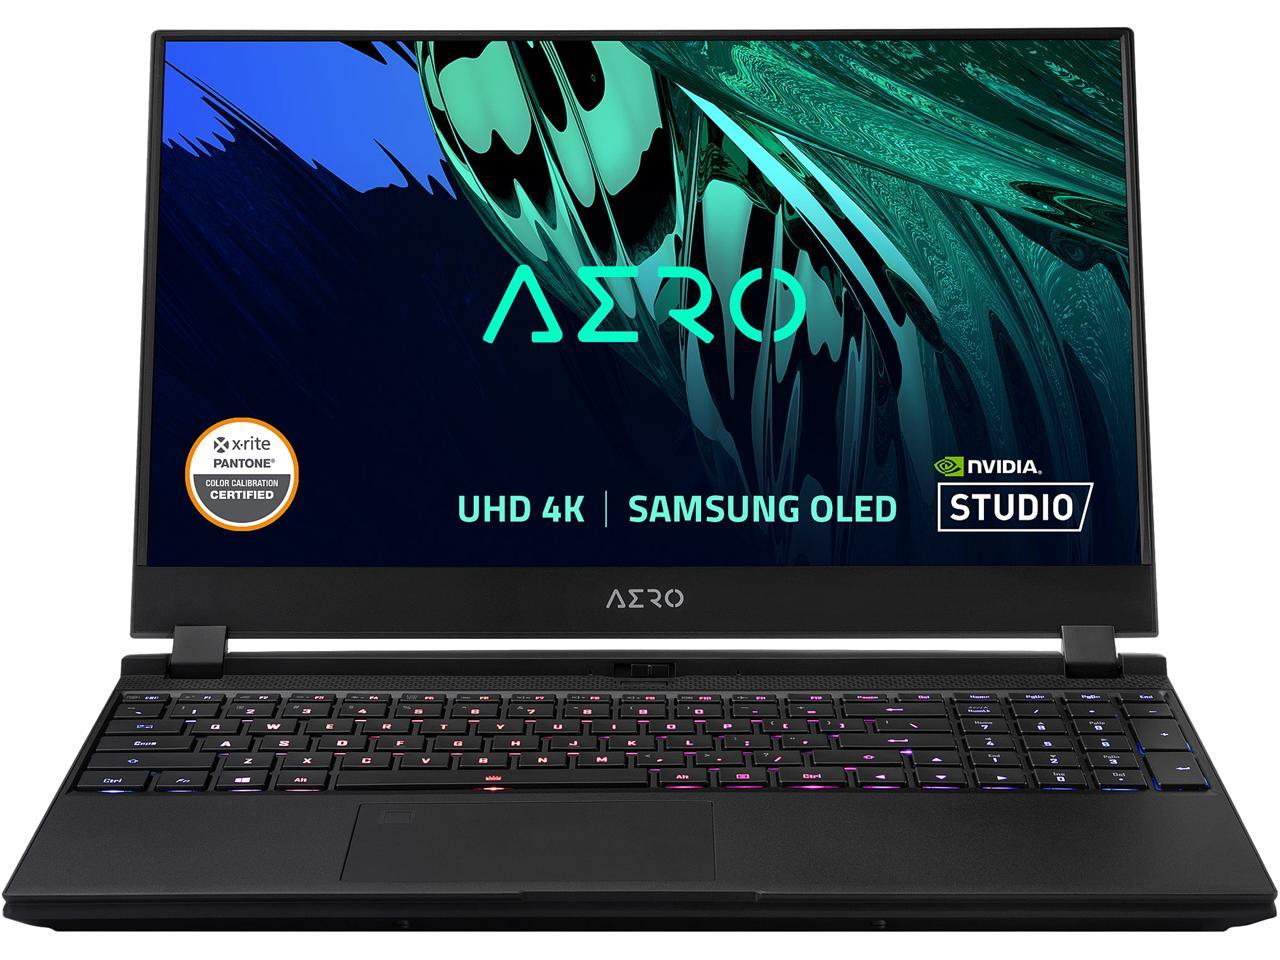 GIGABYTE AERO 15 OLED KD-72US623SP Gaming Notebook [i7-11800H 2.30GHz, 16GB, 512GB SSD, NVIDIA GeForce RTX 3060 Laptop GPU, 15.6"] for $1349 w/ FS after MIR